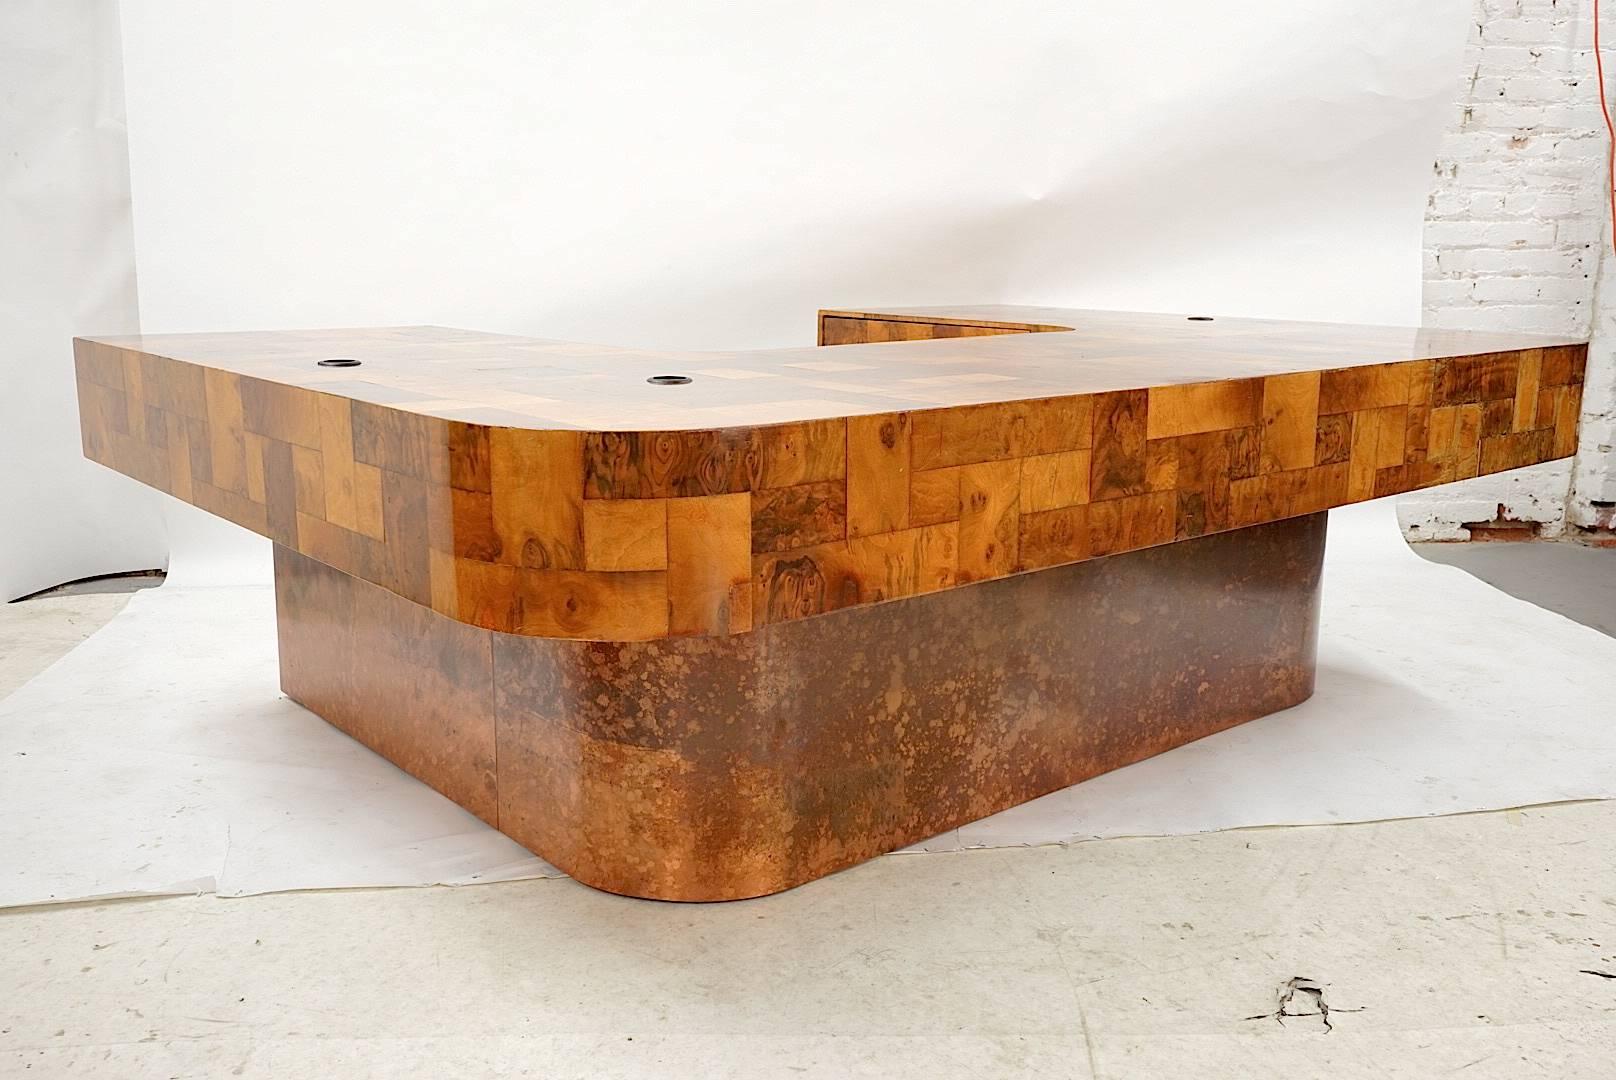 Rare Paul Evans Studio, Cityscape Executive Desk for Directional, Custom Order with Anodized Copper outside base and Bronze Plated Steel Interior Base. Combination of Black Walnut Burl and Olive Burl Wood Veneer Patchwork.  USA Circa 1970